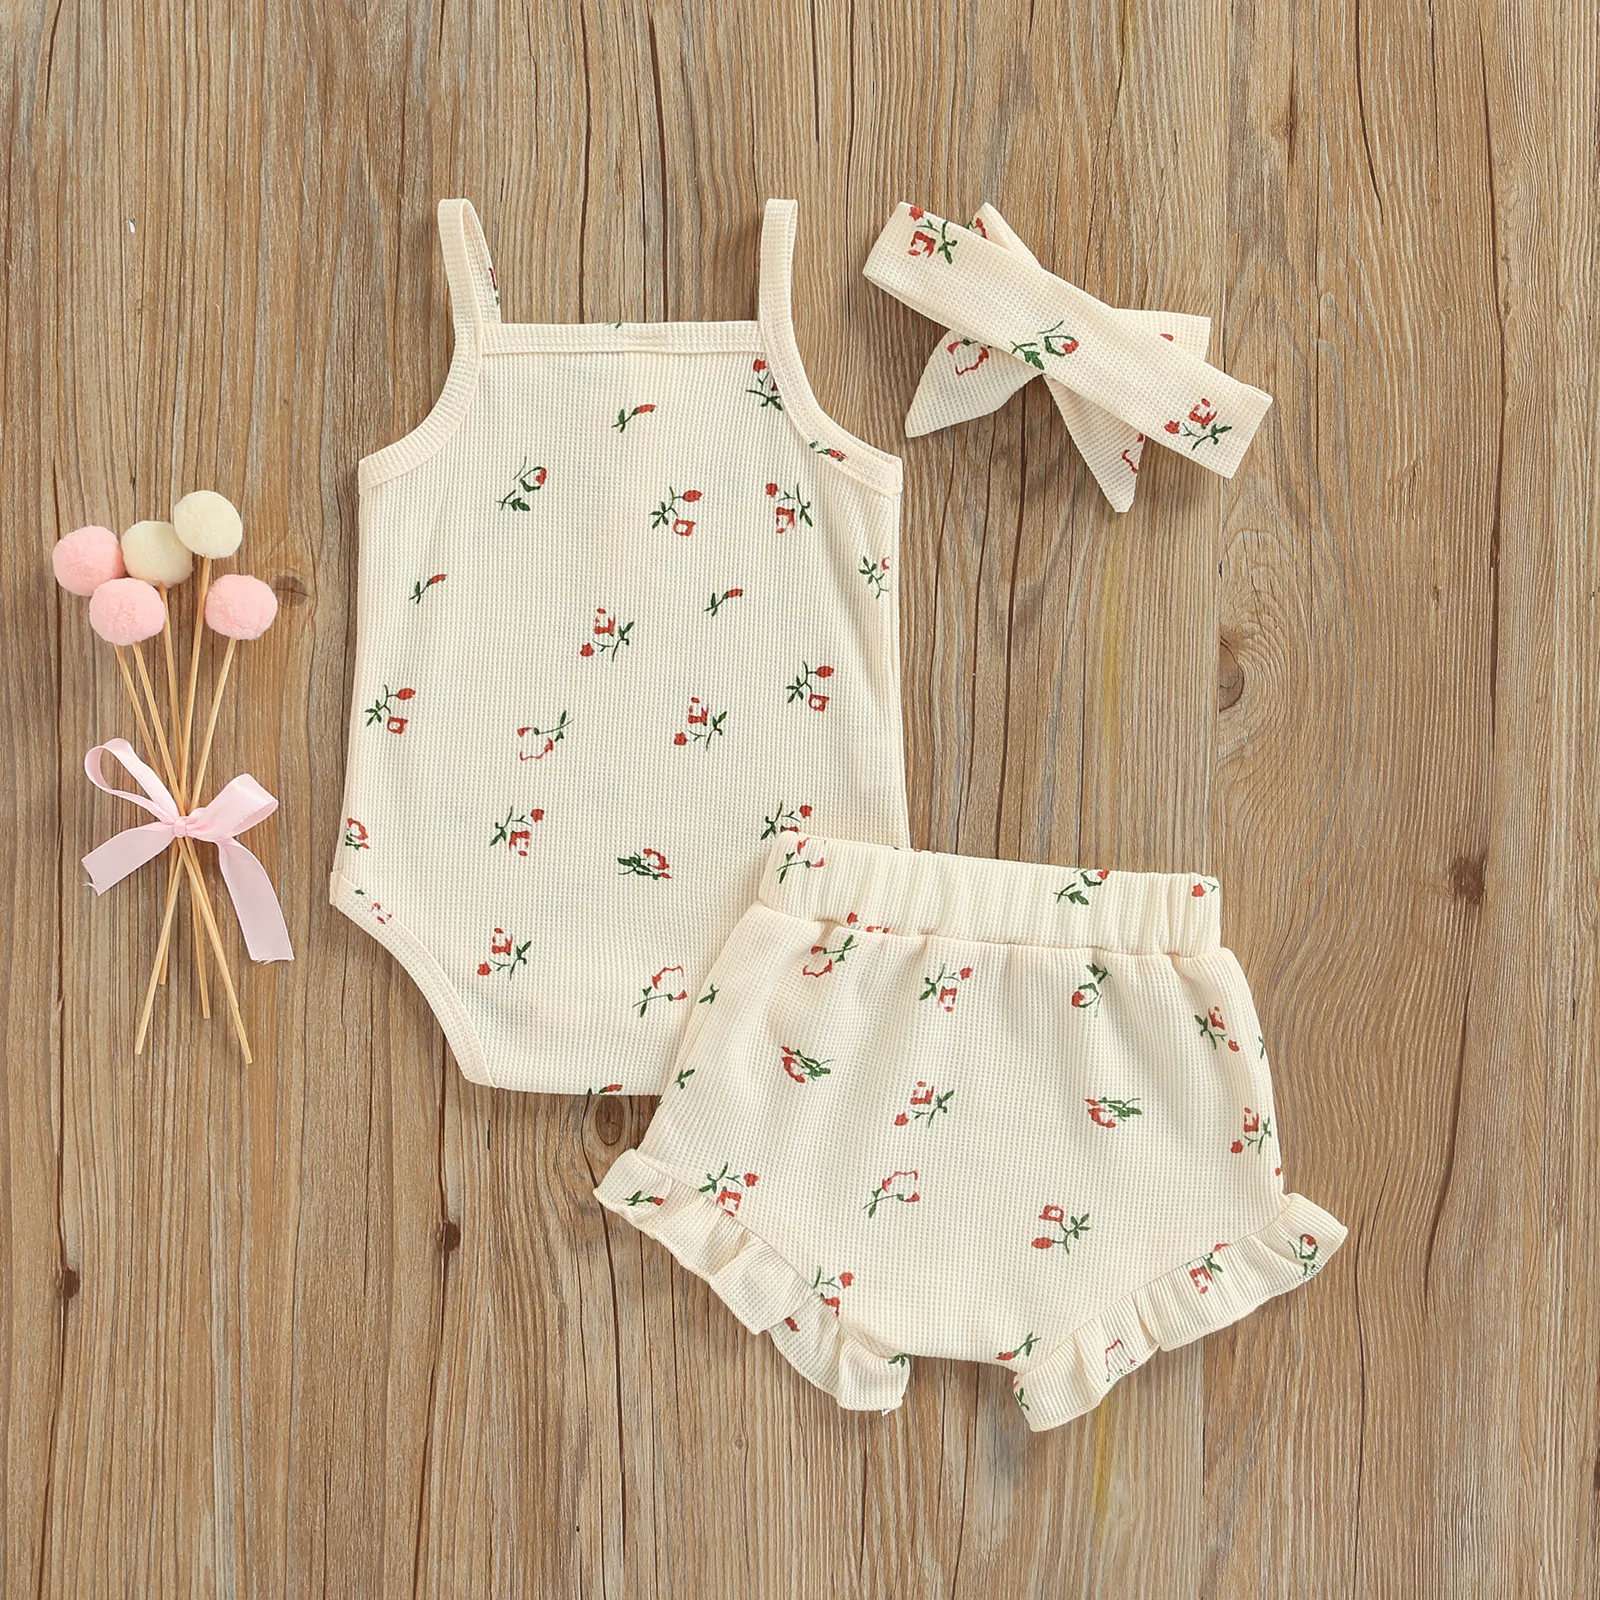 Infant Baby Girl’s Tops and Shorts Set Fashion Floral Suspender Romper and Short Pants with Headband baby clothes mini set